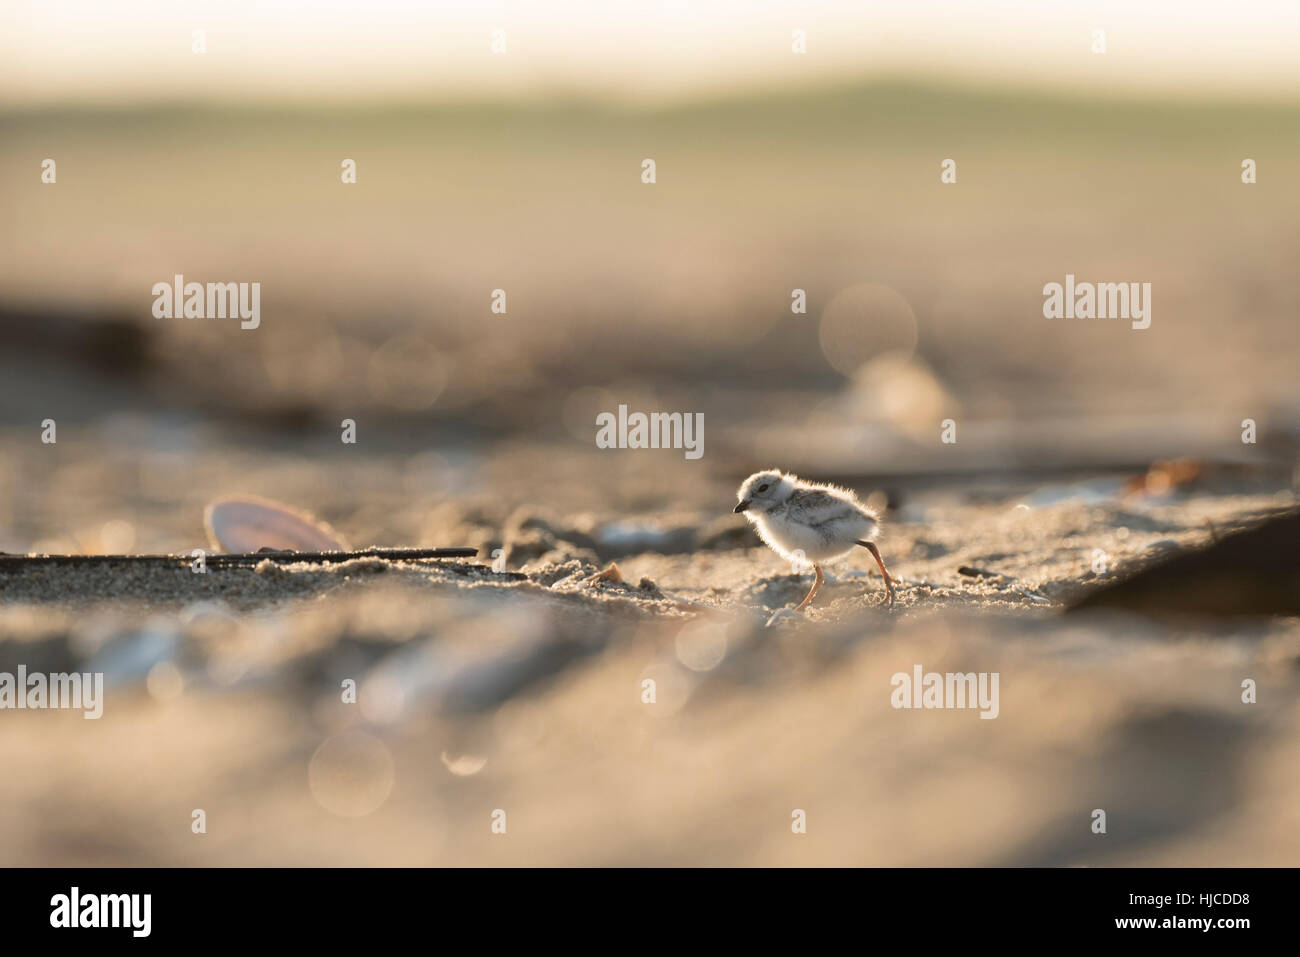 An endangered cute and tiny Piping Plover chick stands on a sandy beach as the early morning sun shines from behind it. Stock Photo